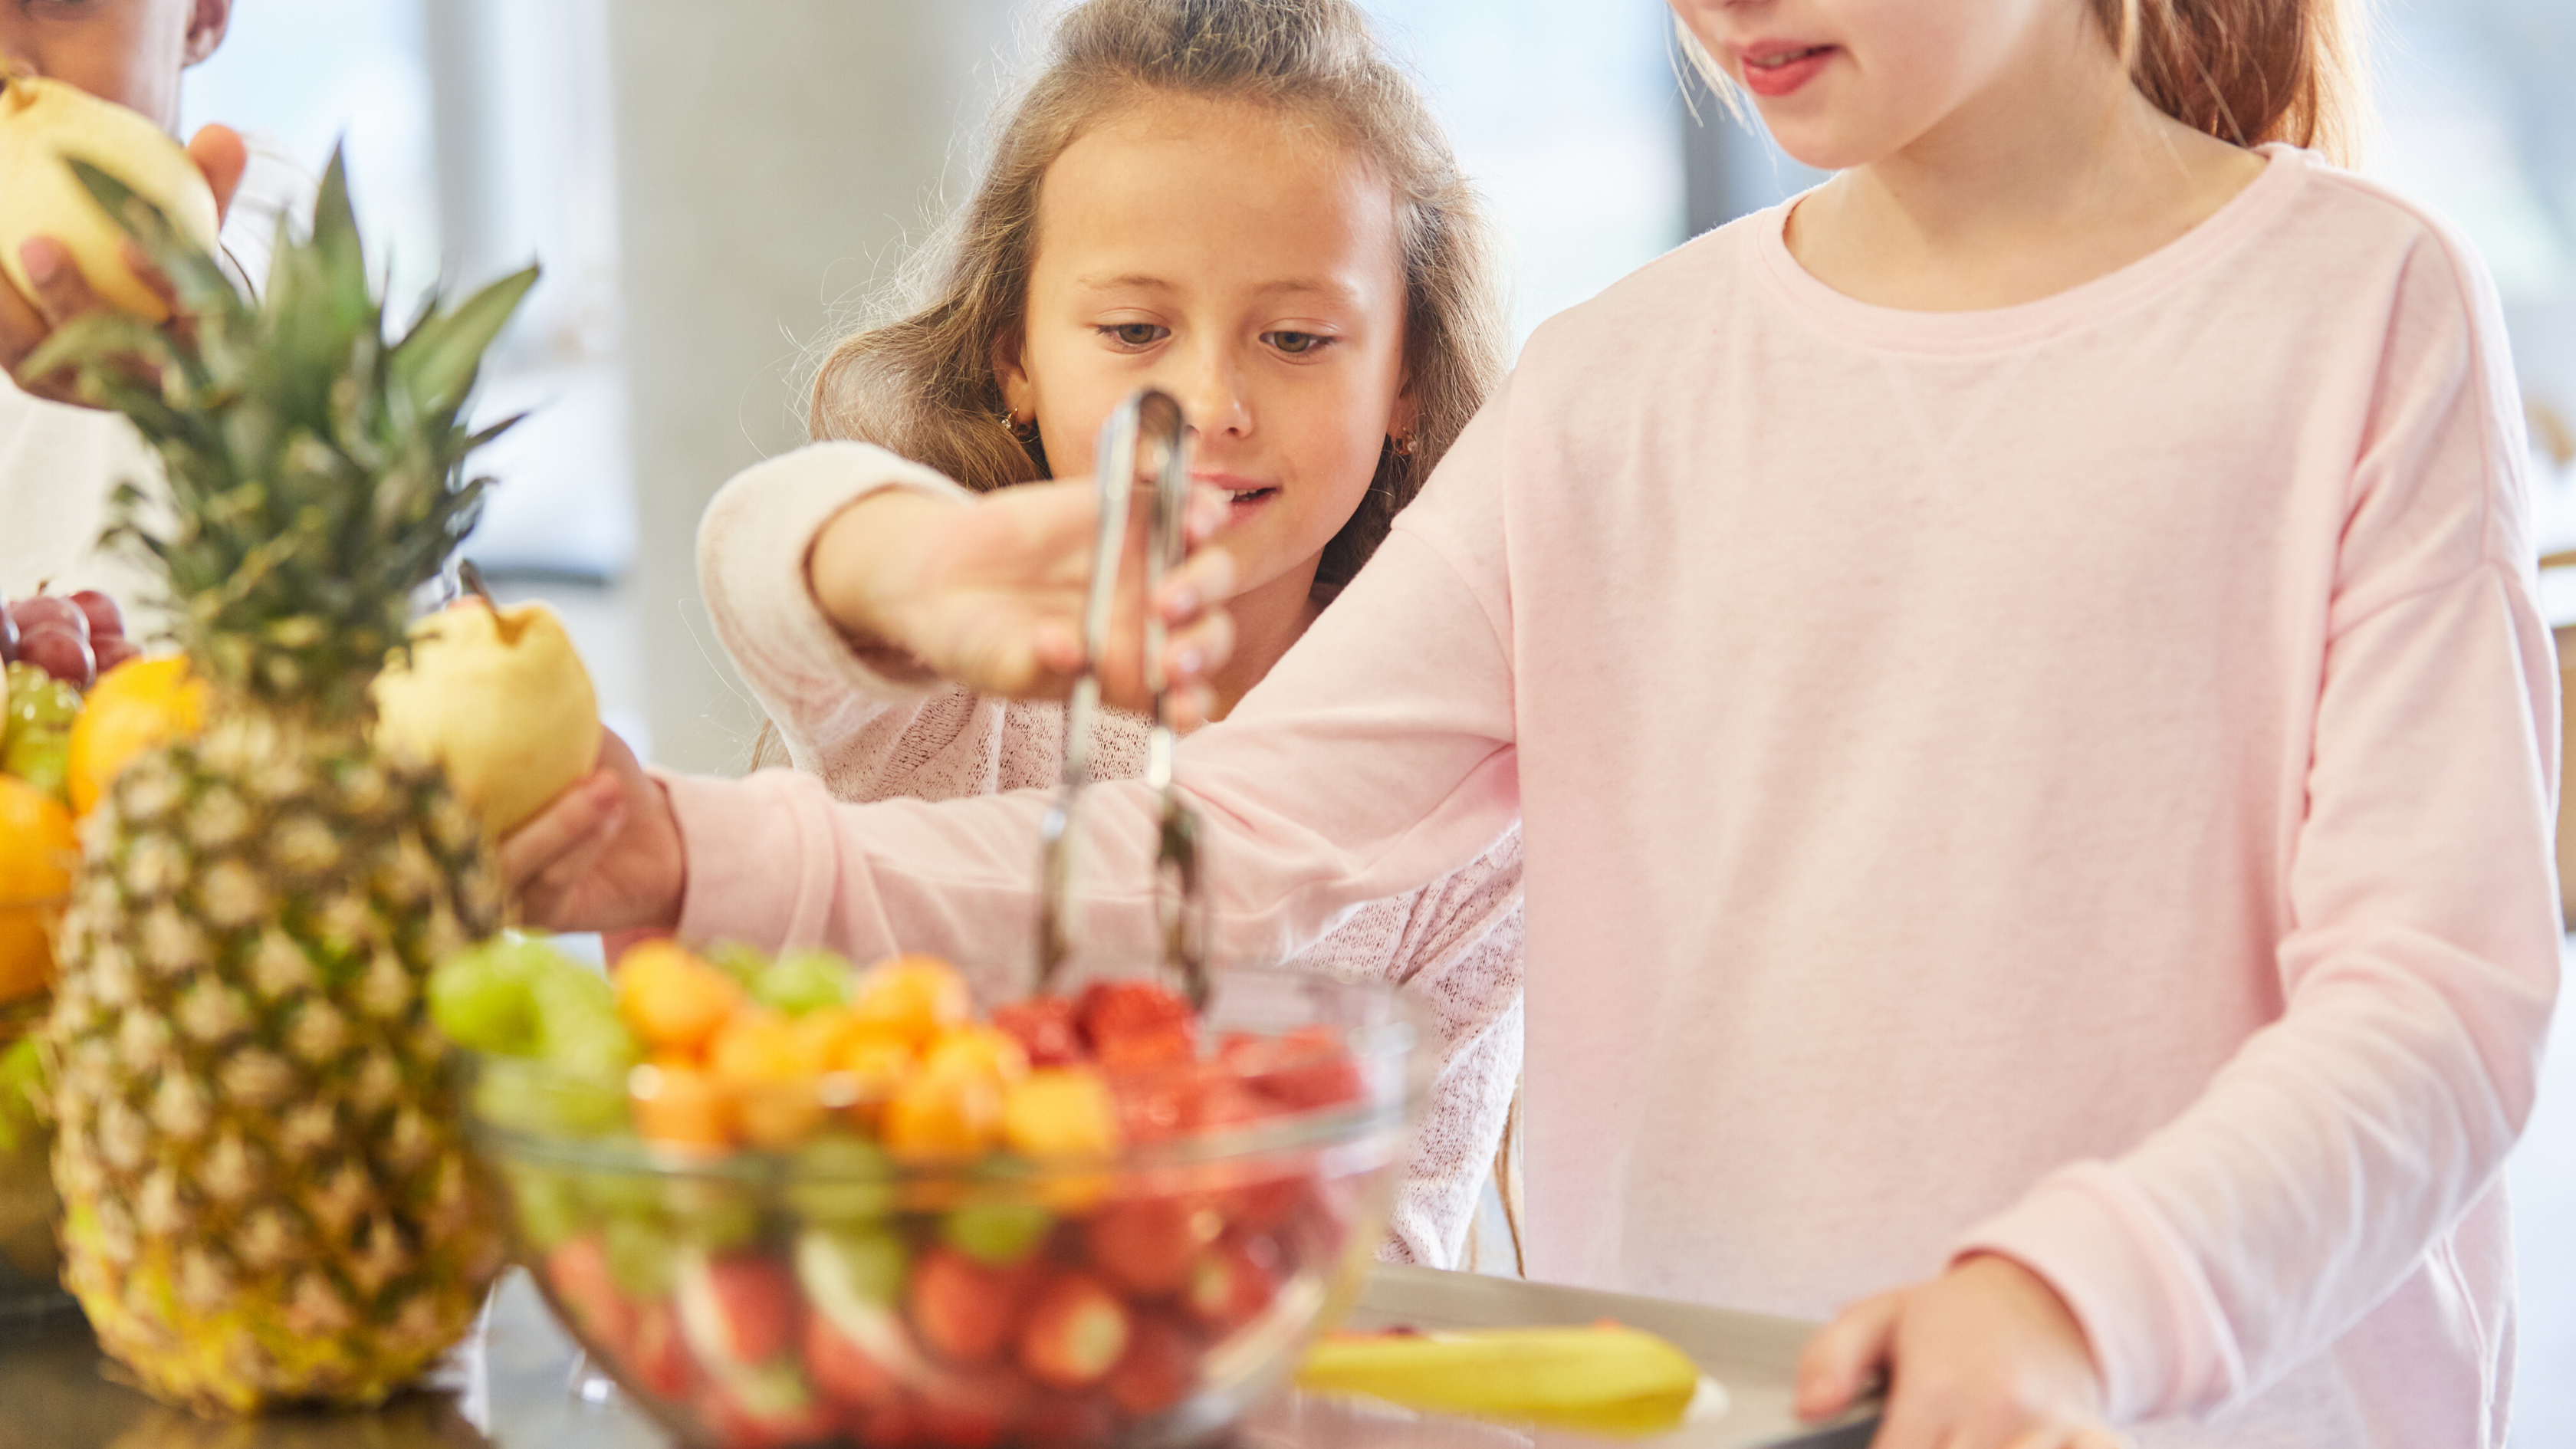 how to promote healthy eating in schools